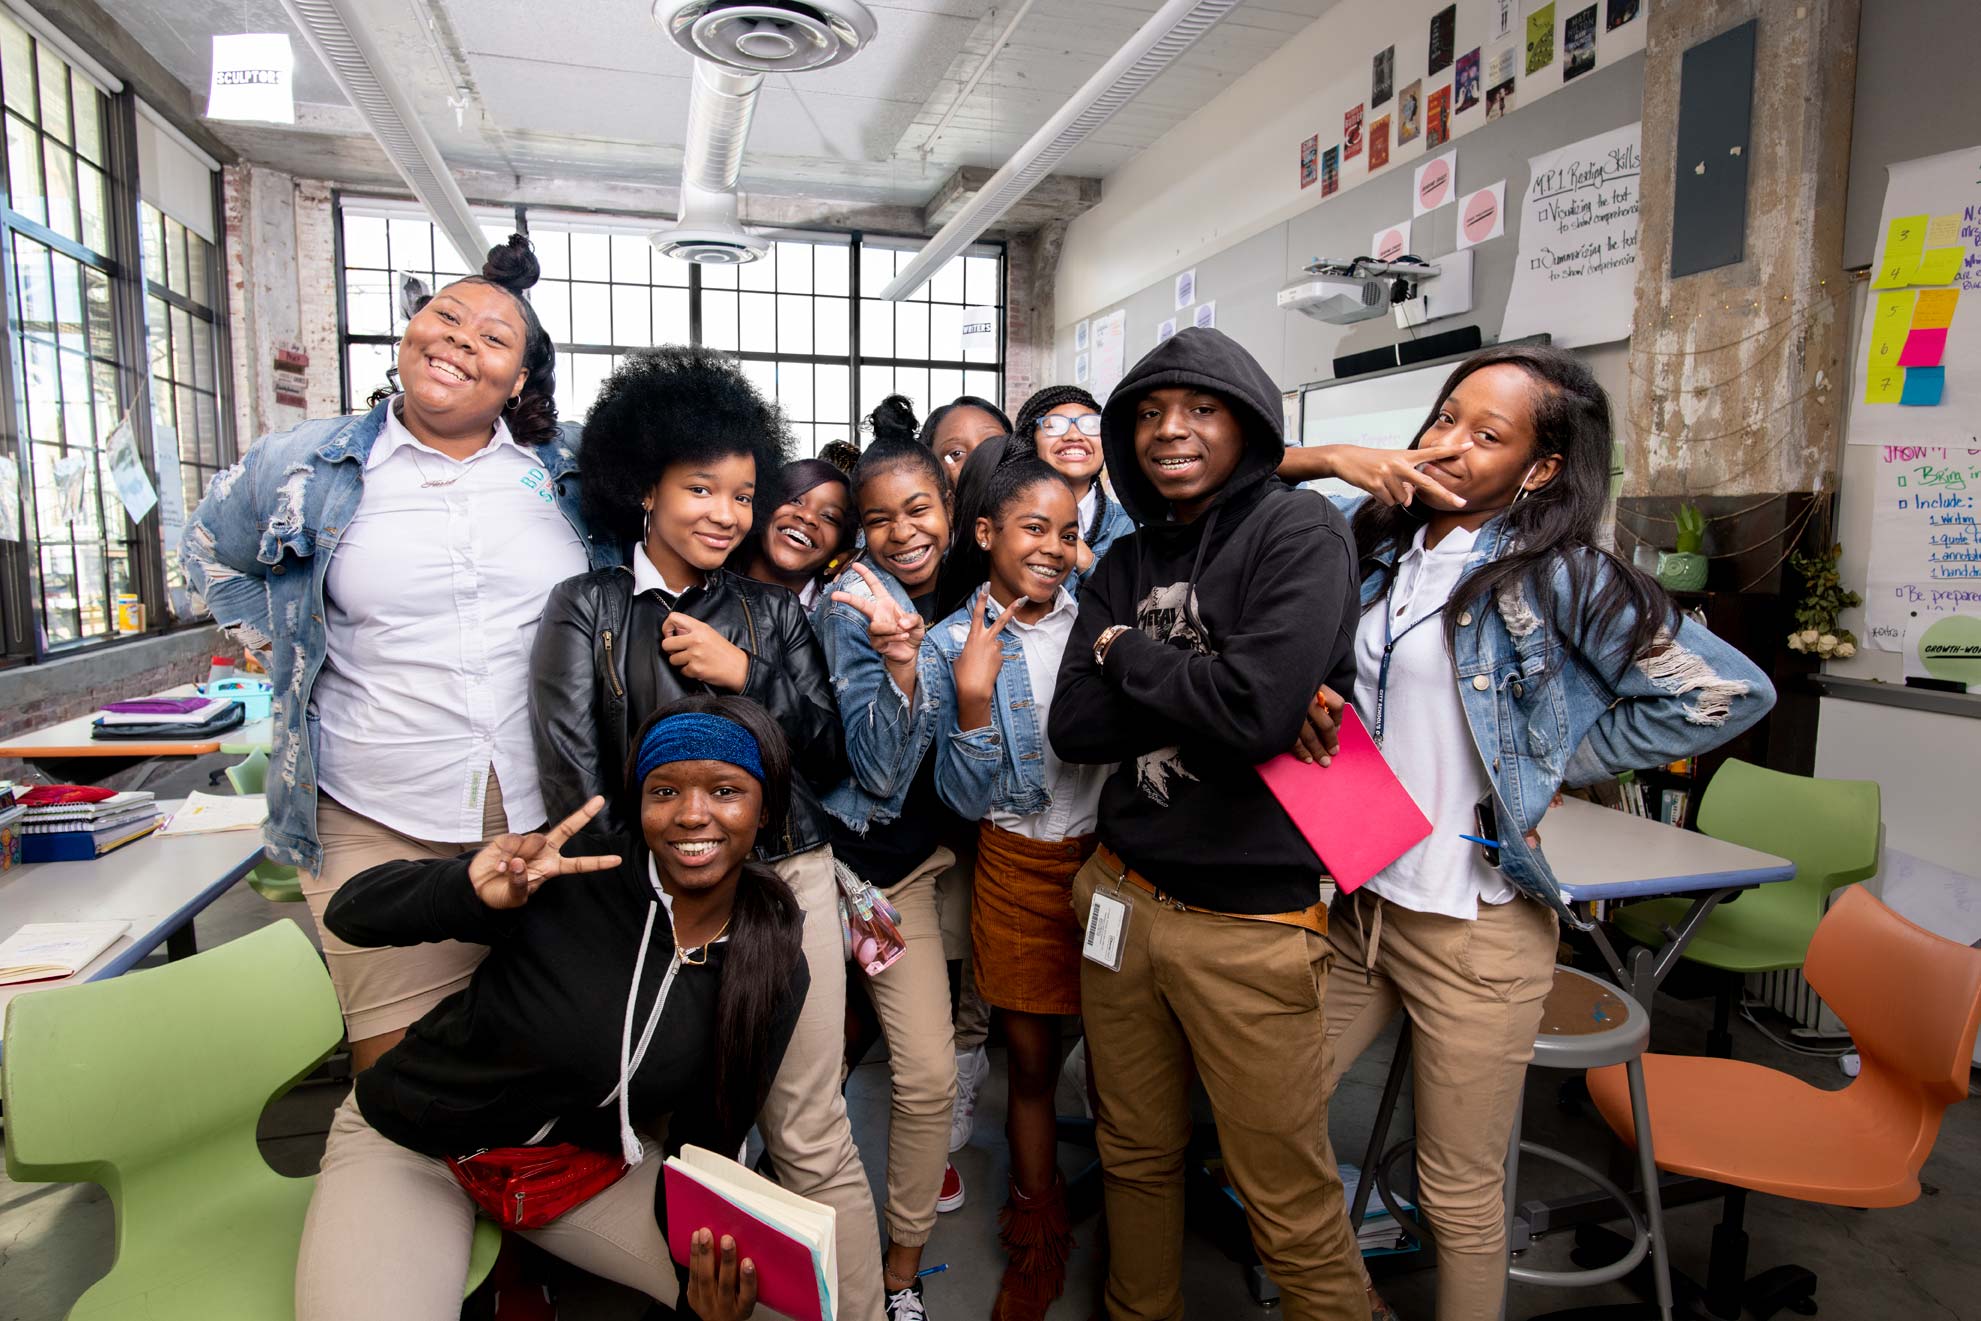 A group of kids posing for the camera in their classroom at the Baltimore Design School